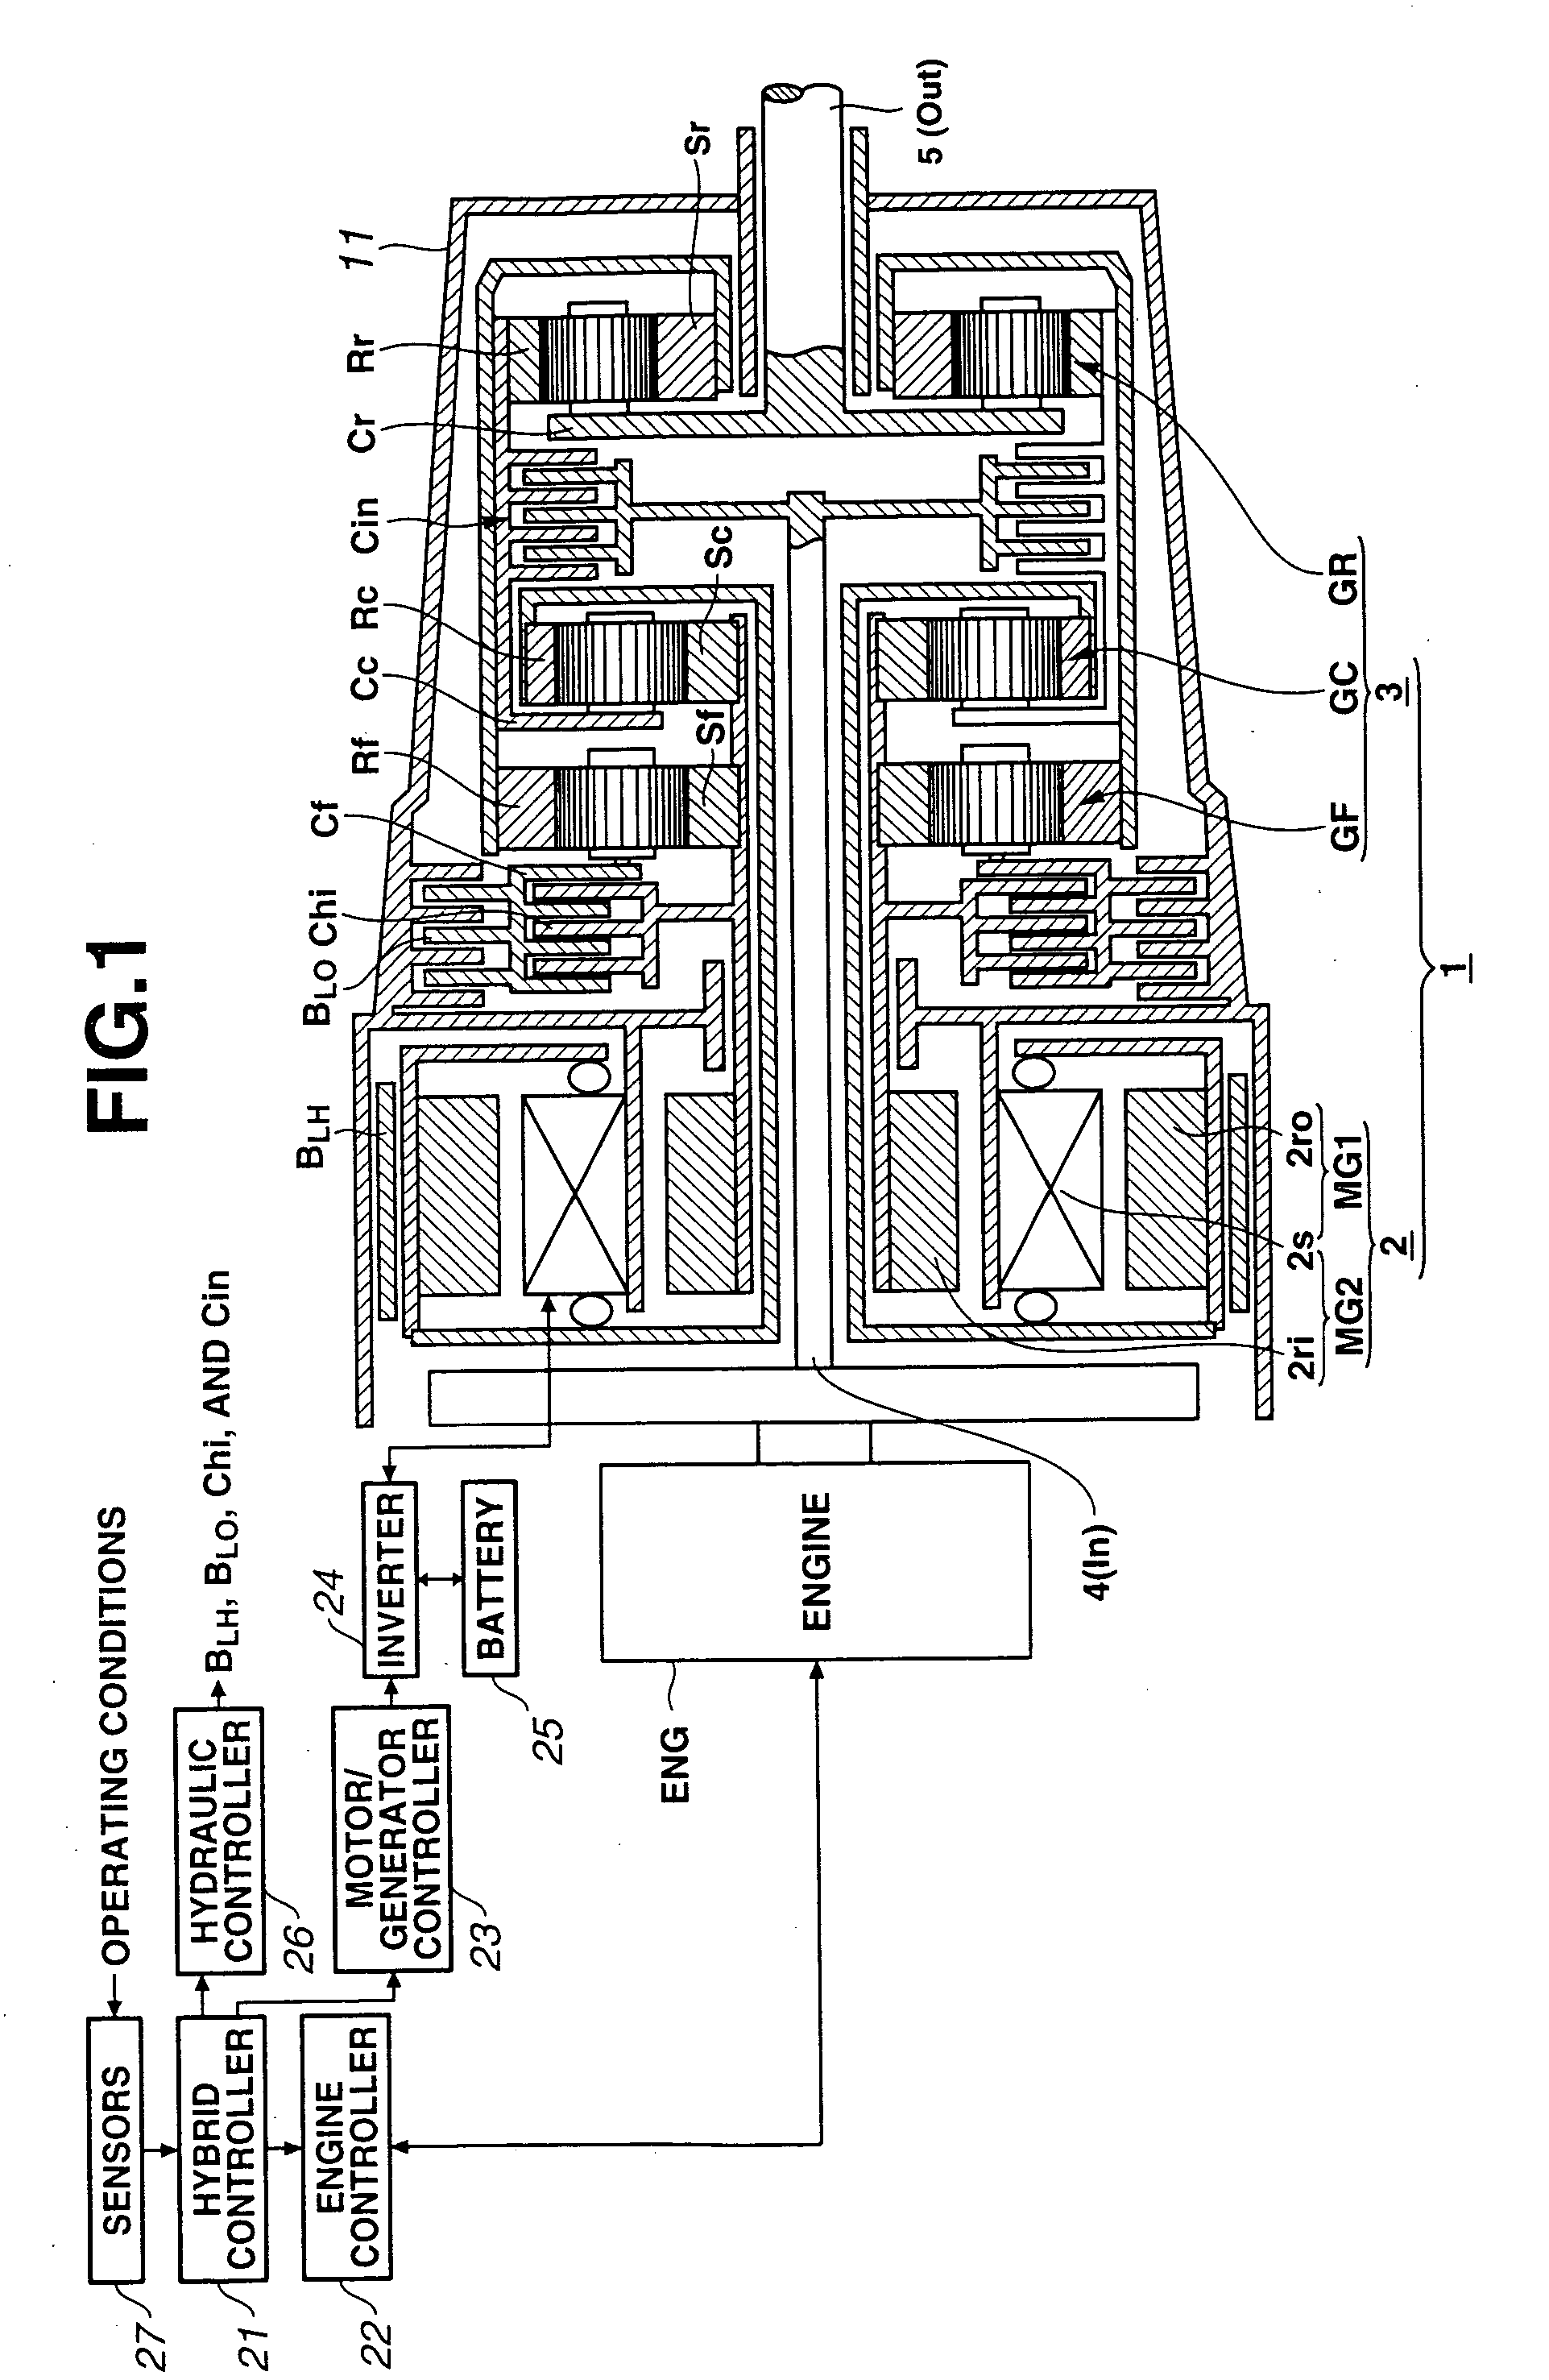 Mode switch control system for hybrid transmission